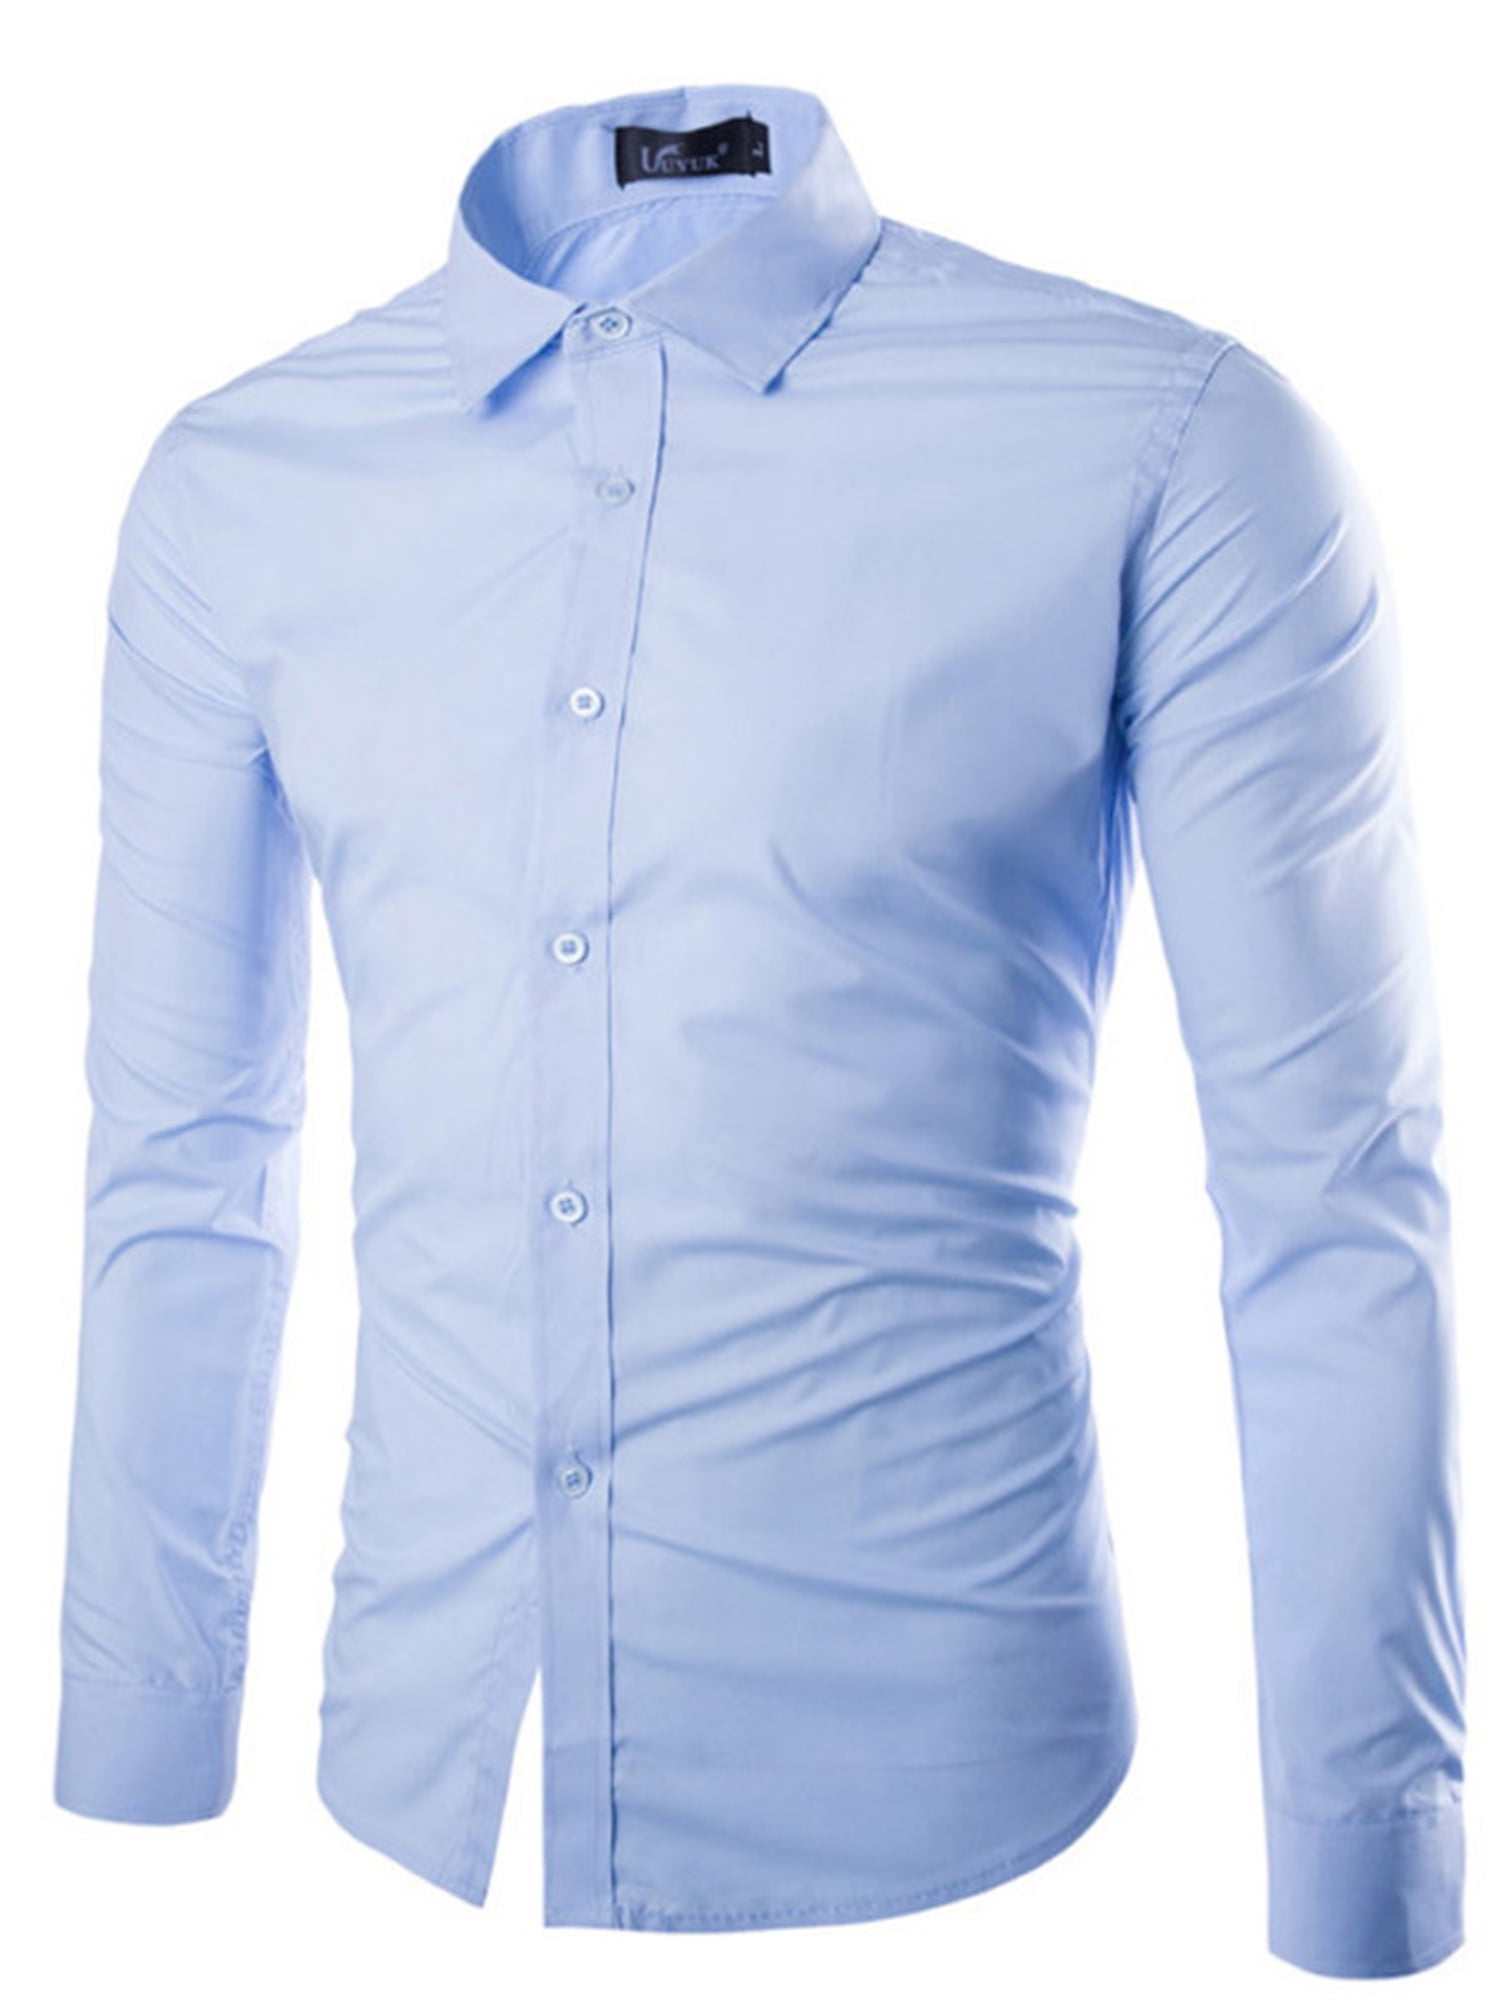 Wsevypo Men's Long Sleeve Dress Shirt Solid Slim Fit Casual Business ...